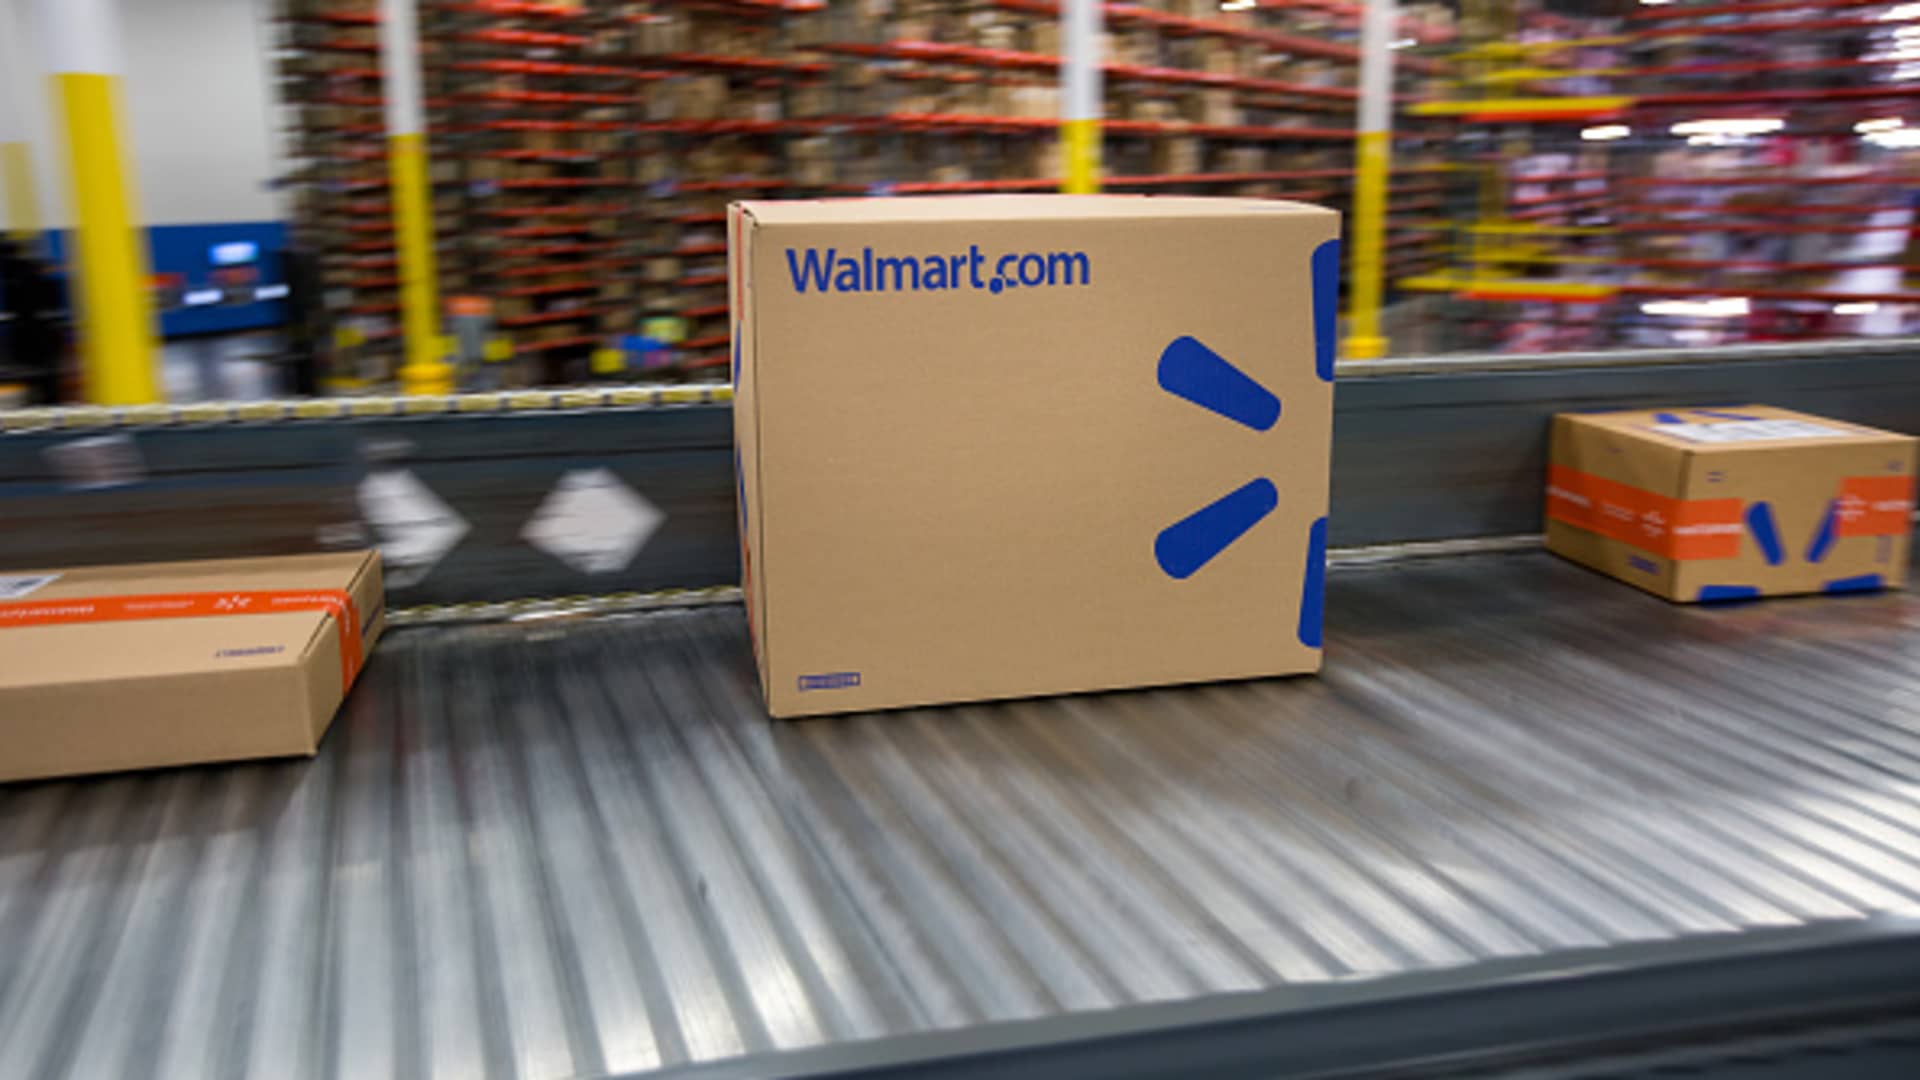 Walmart is using its thousands of stores to battle Amazon for e-commerce market share